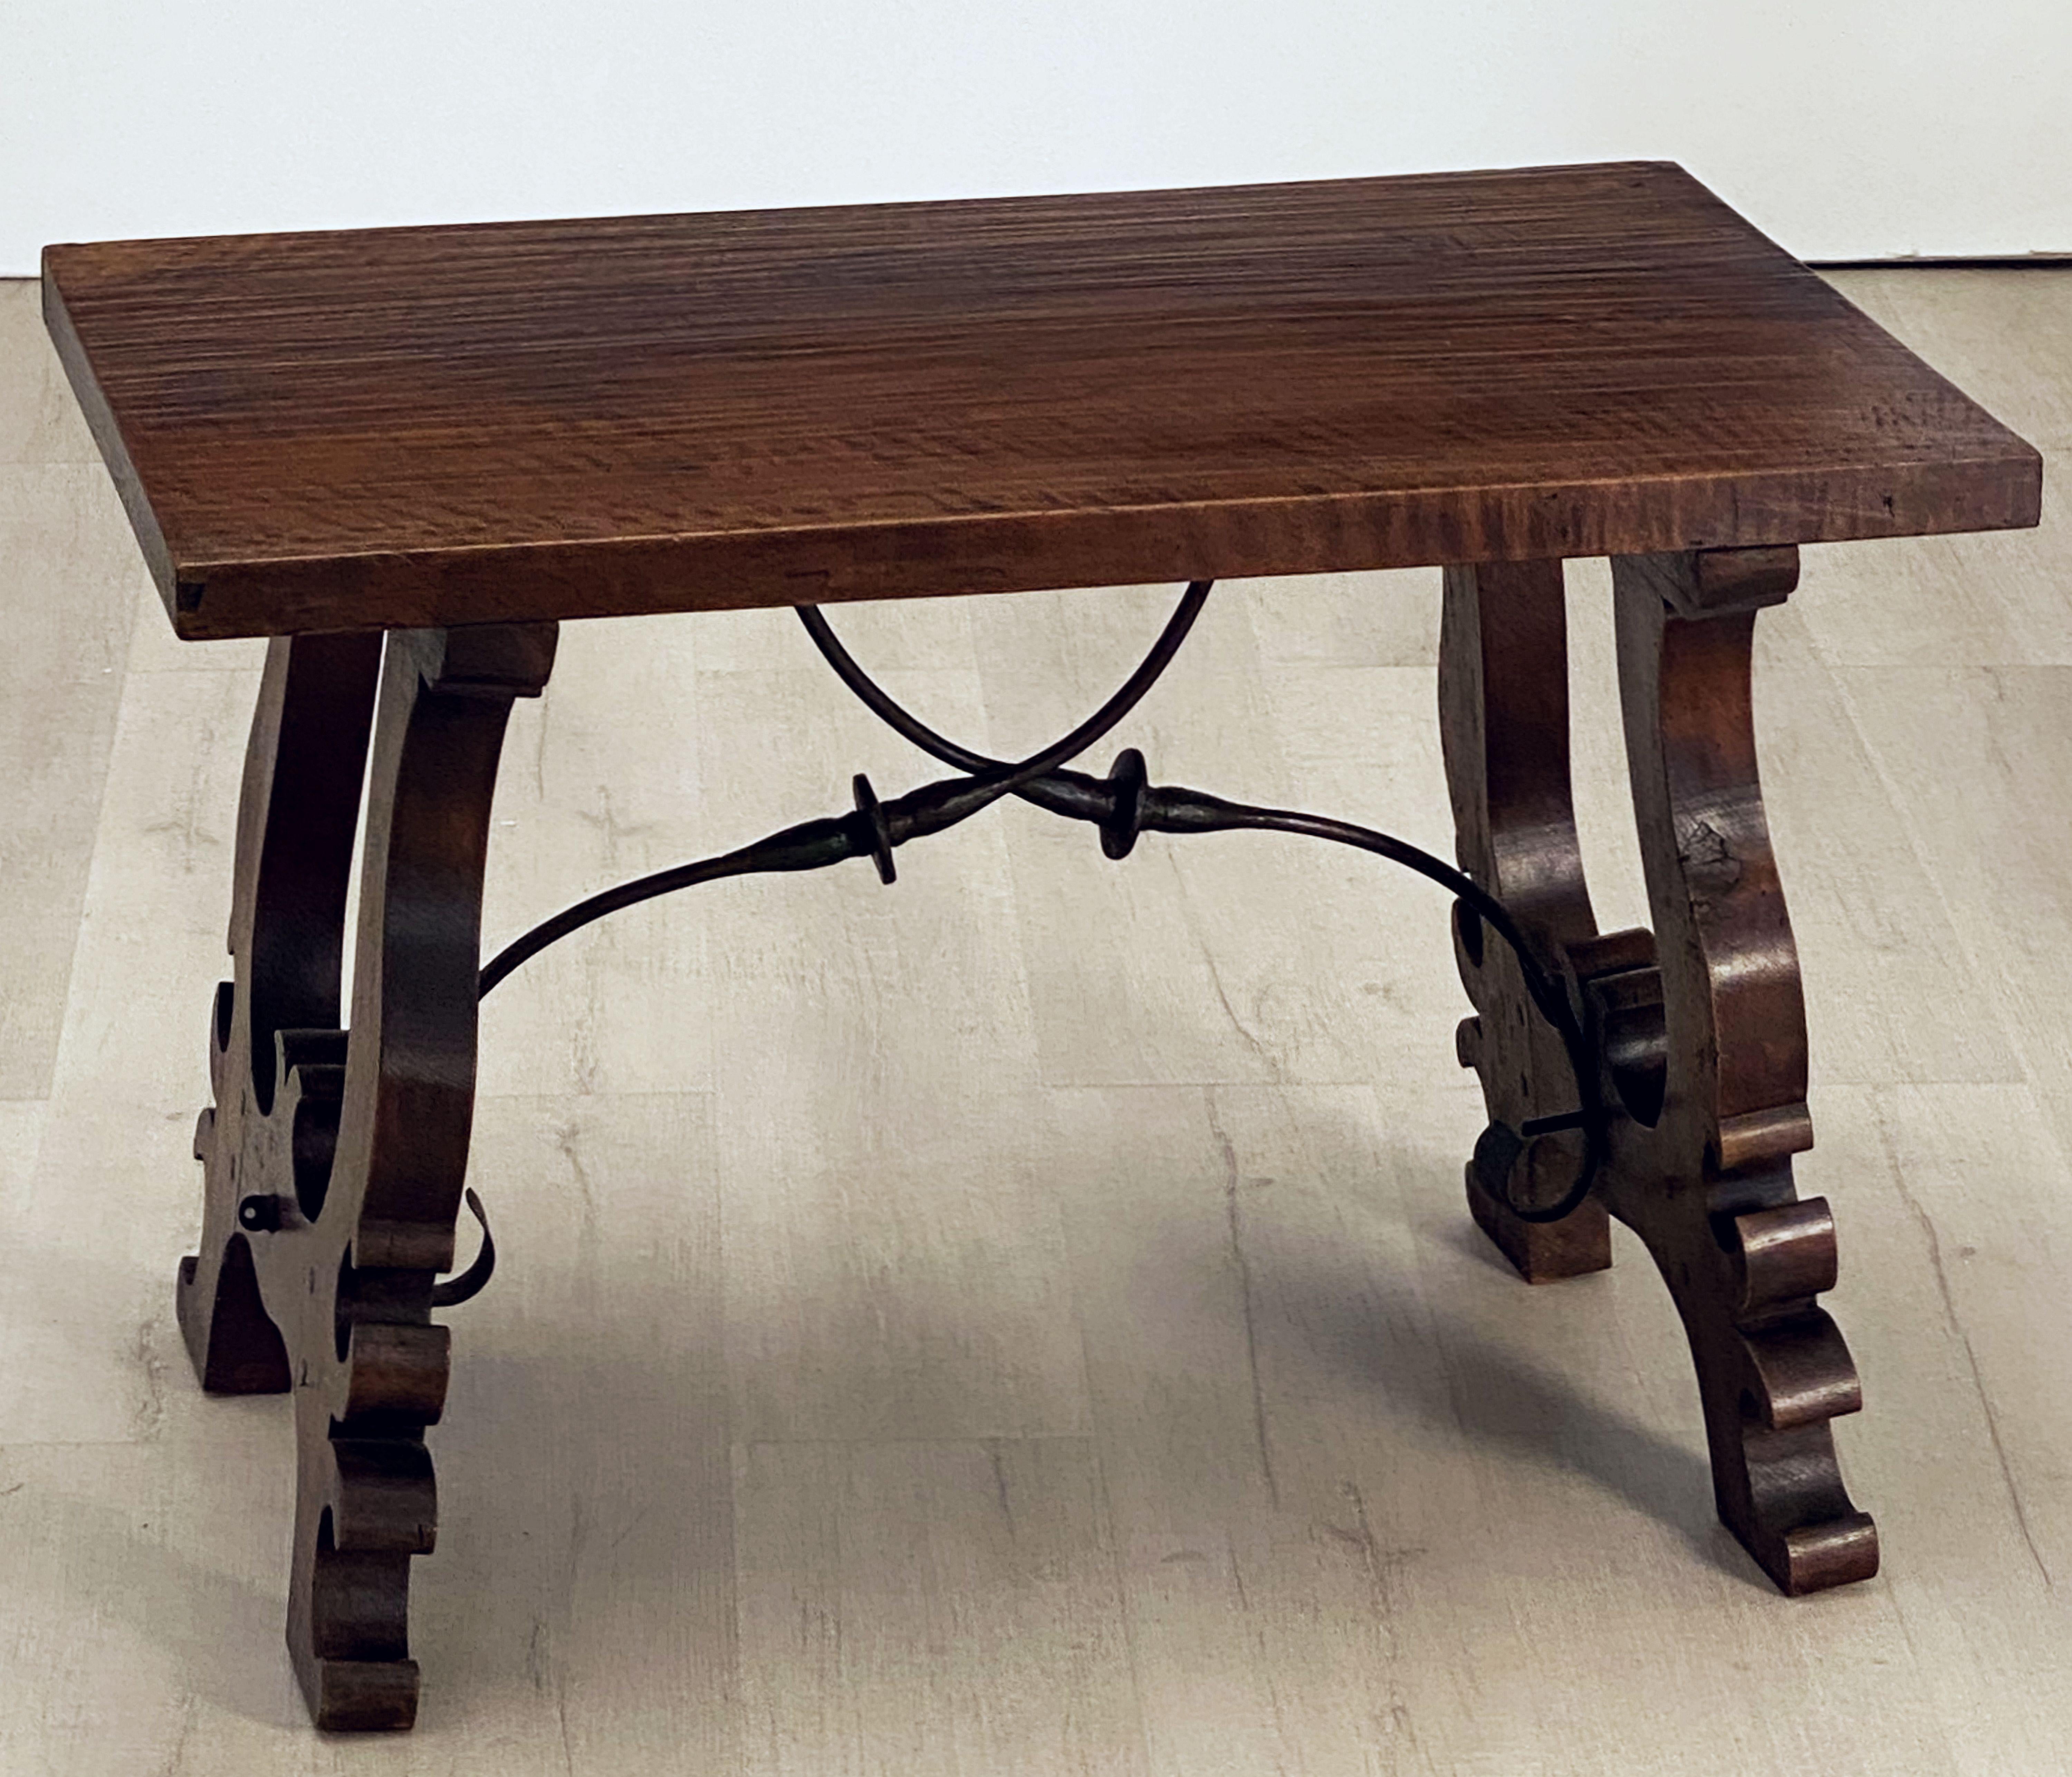 Rustic Spanish Low Table of Walnut with Wrought Iron Supports